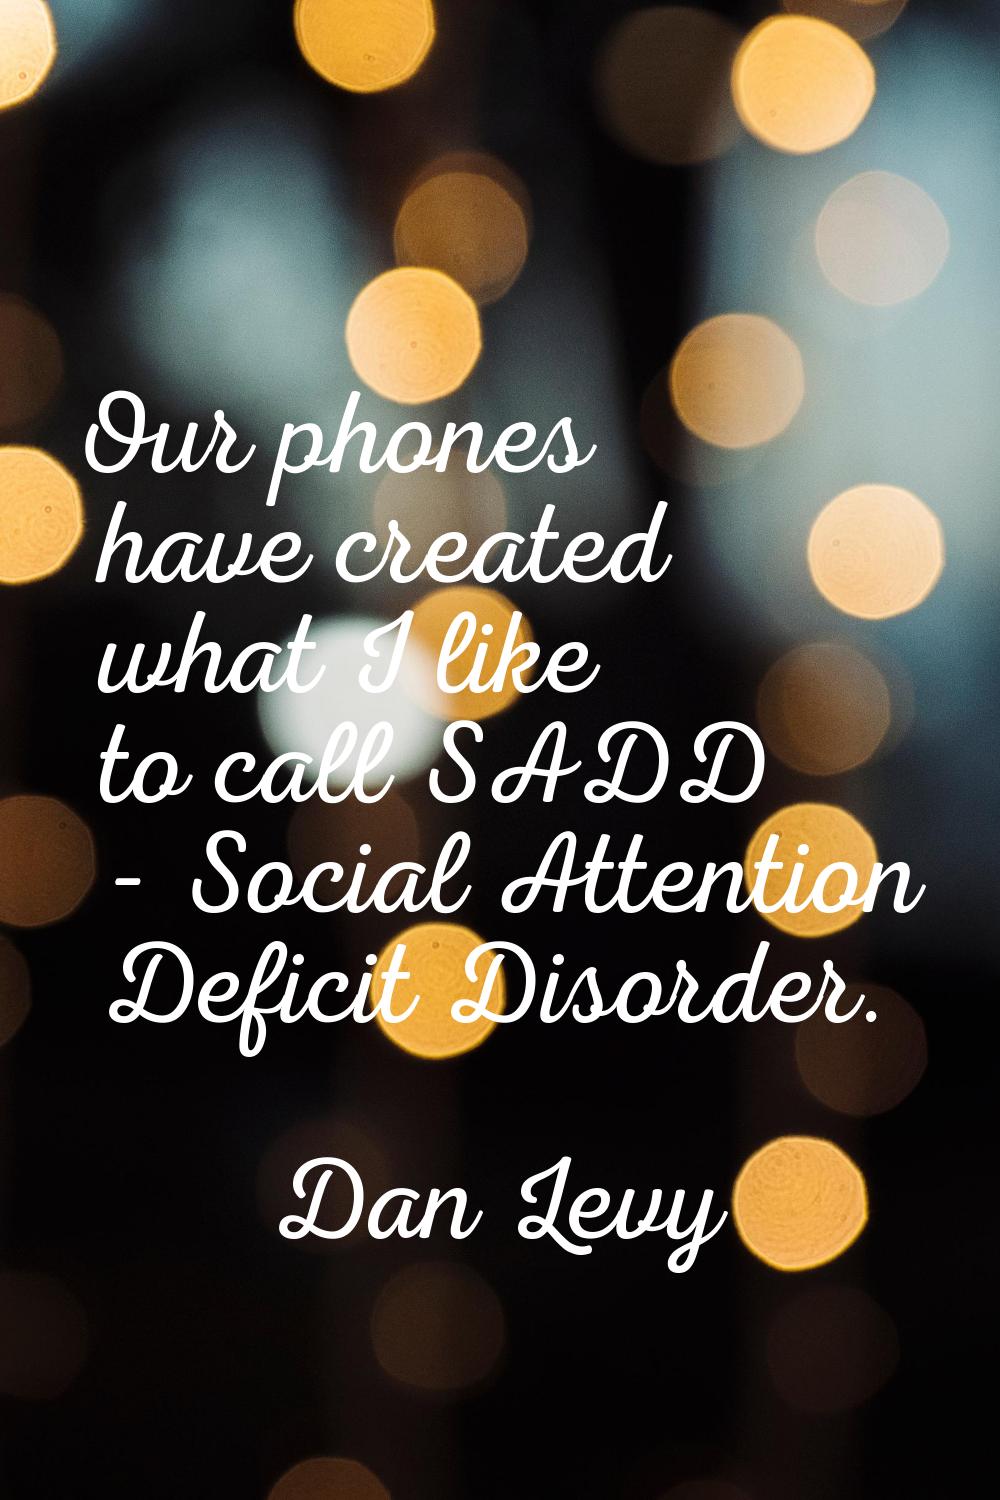 Our phones have created what I like to call SADD - Social Attention Deficit Disorder.